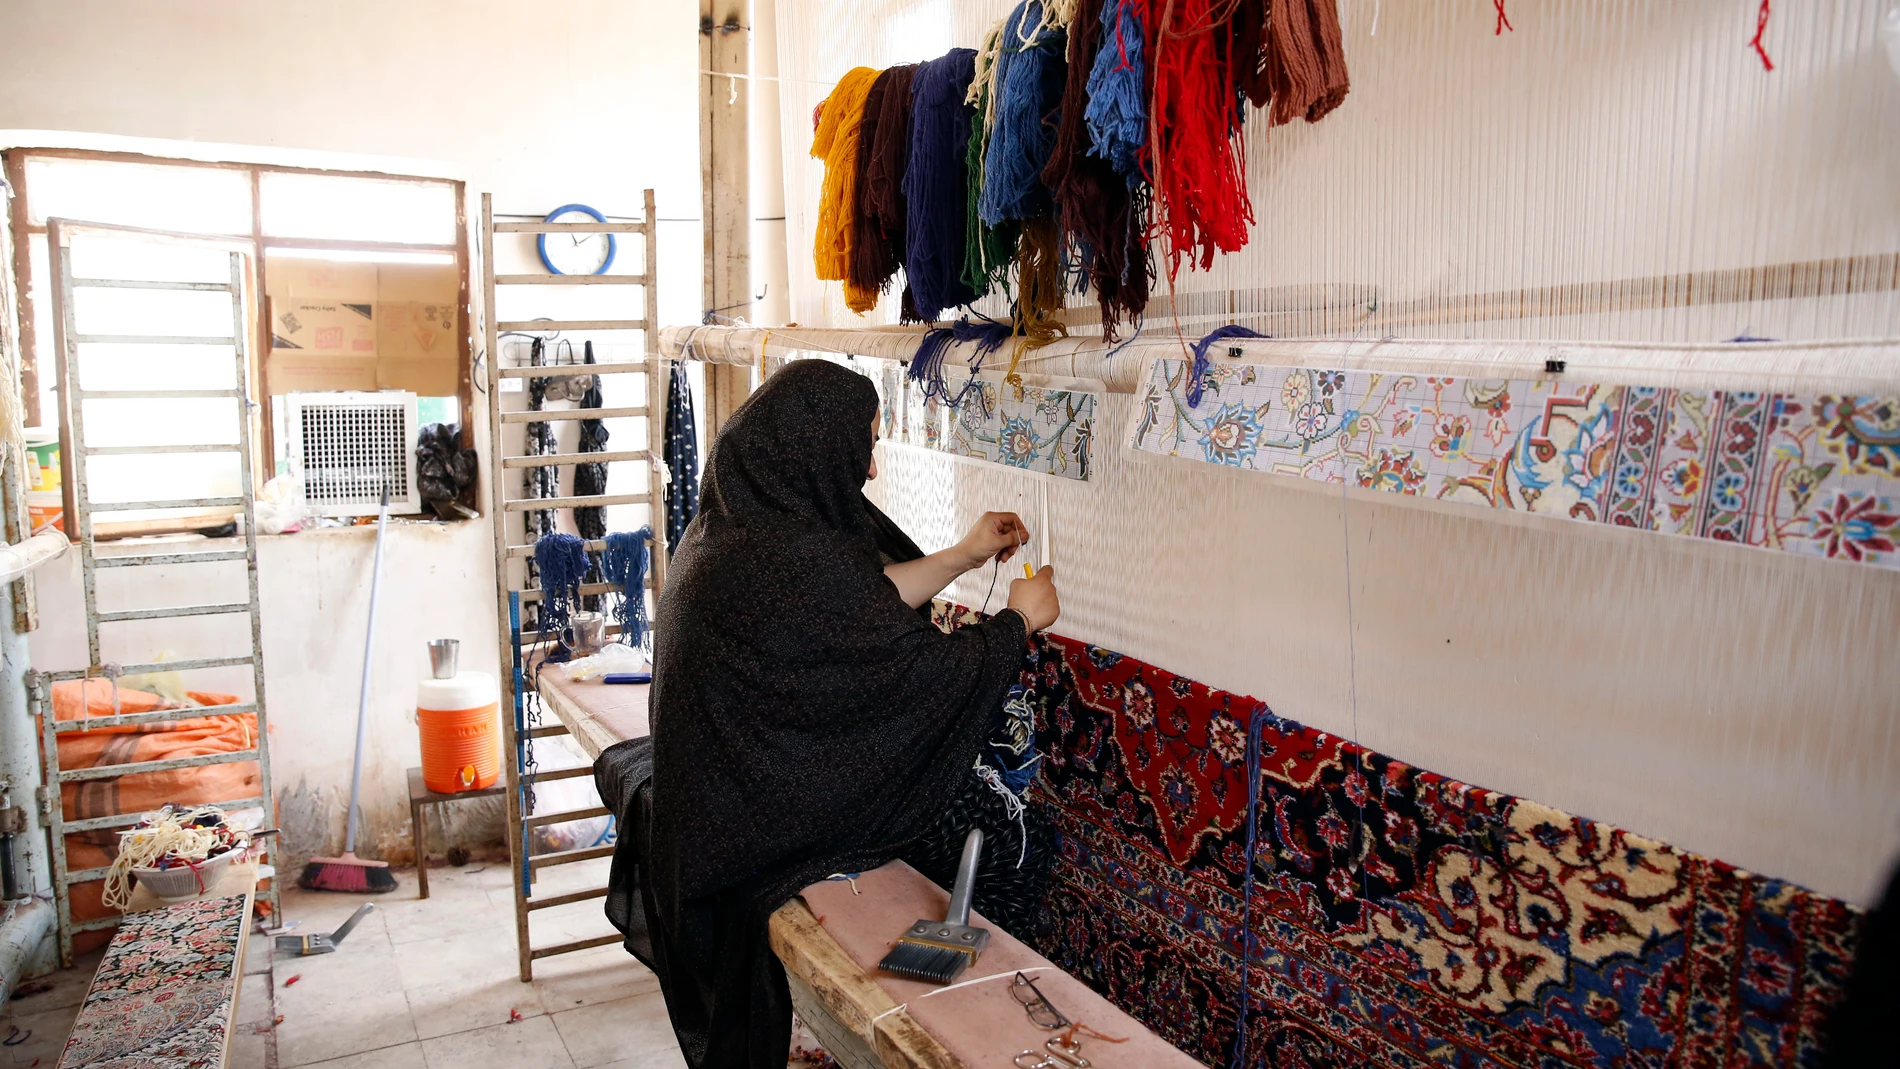 Nushabad (Iran(islamic Republic Of)), 26/07/2023.- An Iranian woman is crafting a handmade carpet in a weaving workshop in a house in Nushabad, Kashan province, central Iran, 26 July 2023 (issued 27 July 2023). Handmade carpets from Kashan are renowned in the country and around the world. However, Iran's carpet industry has been impacted due to the sanctions imposed on Iran because of its nuclear program. Iran used to be a significant exporter of handmade carpets globally. EFE/EPA/ABEDIN TAHE...